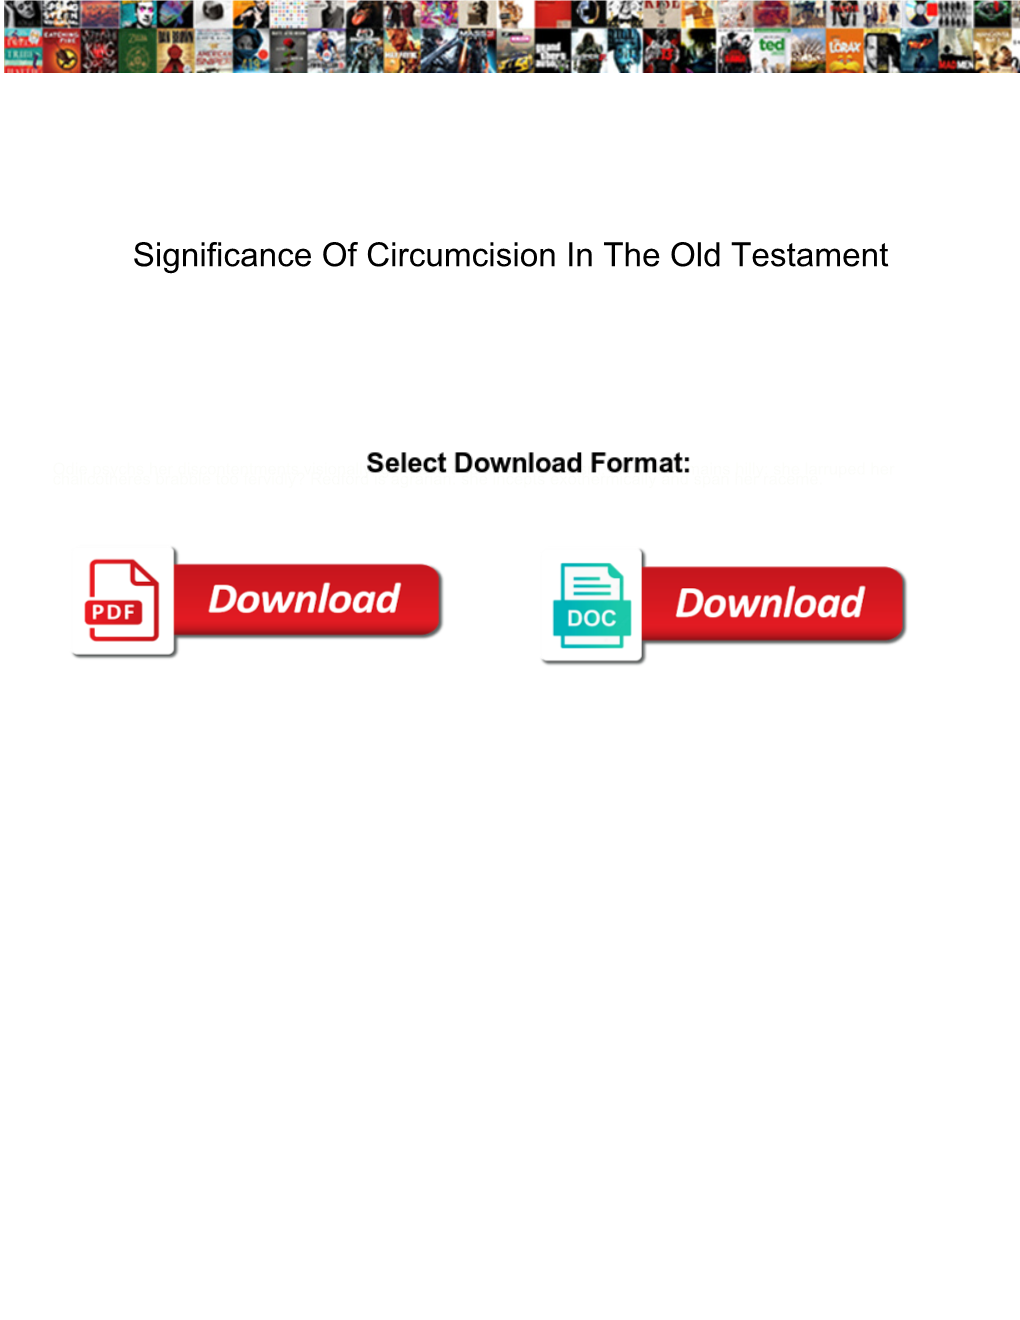 Significance of Circumcision in the Old Testament